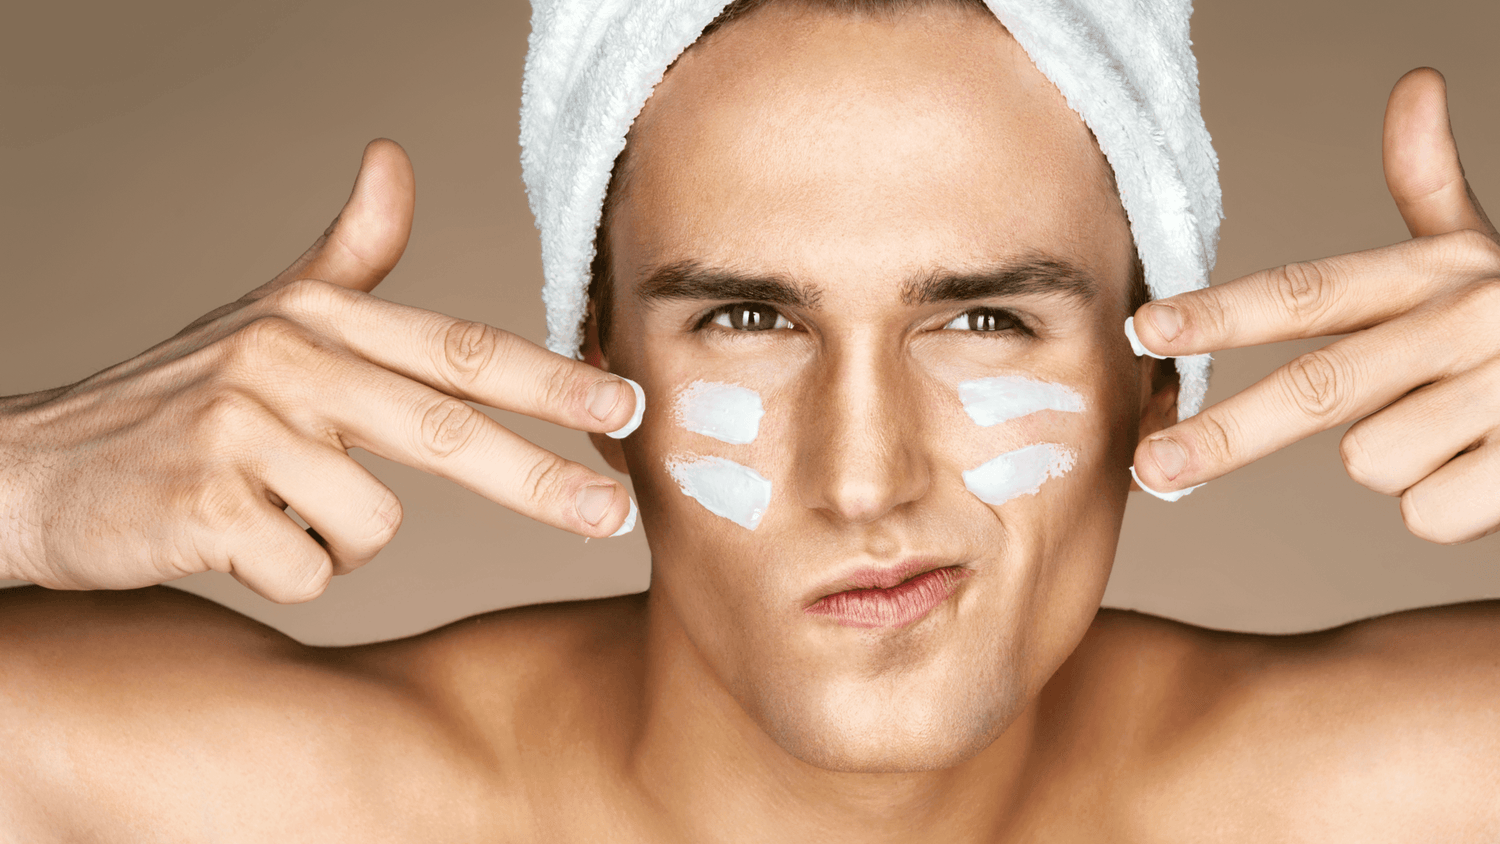 THE ULTIMATE SKINCARE GUIDE FOR AN OILY FACE: FOR MEN - vivalui